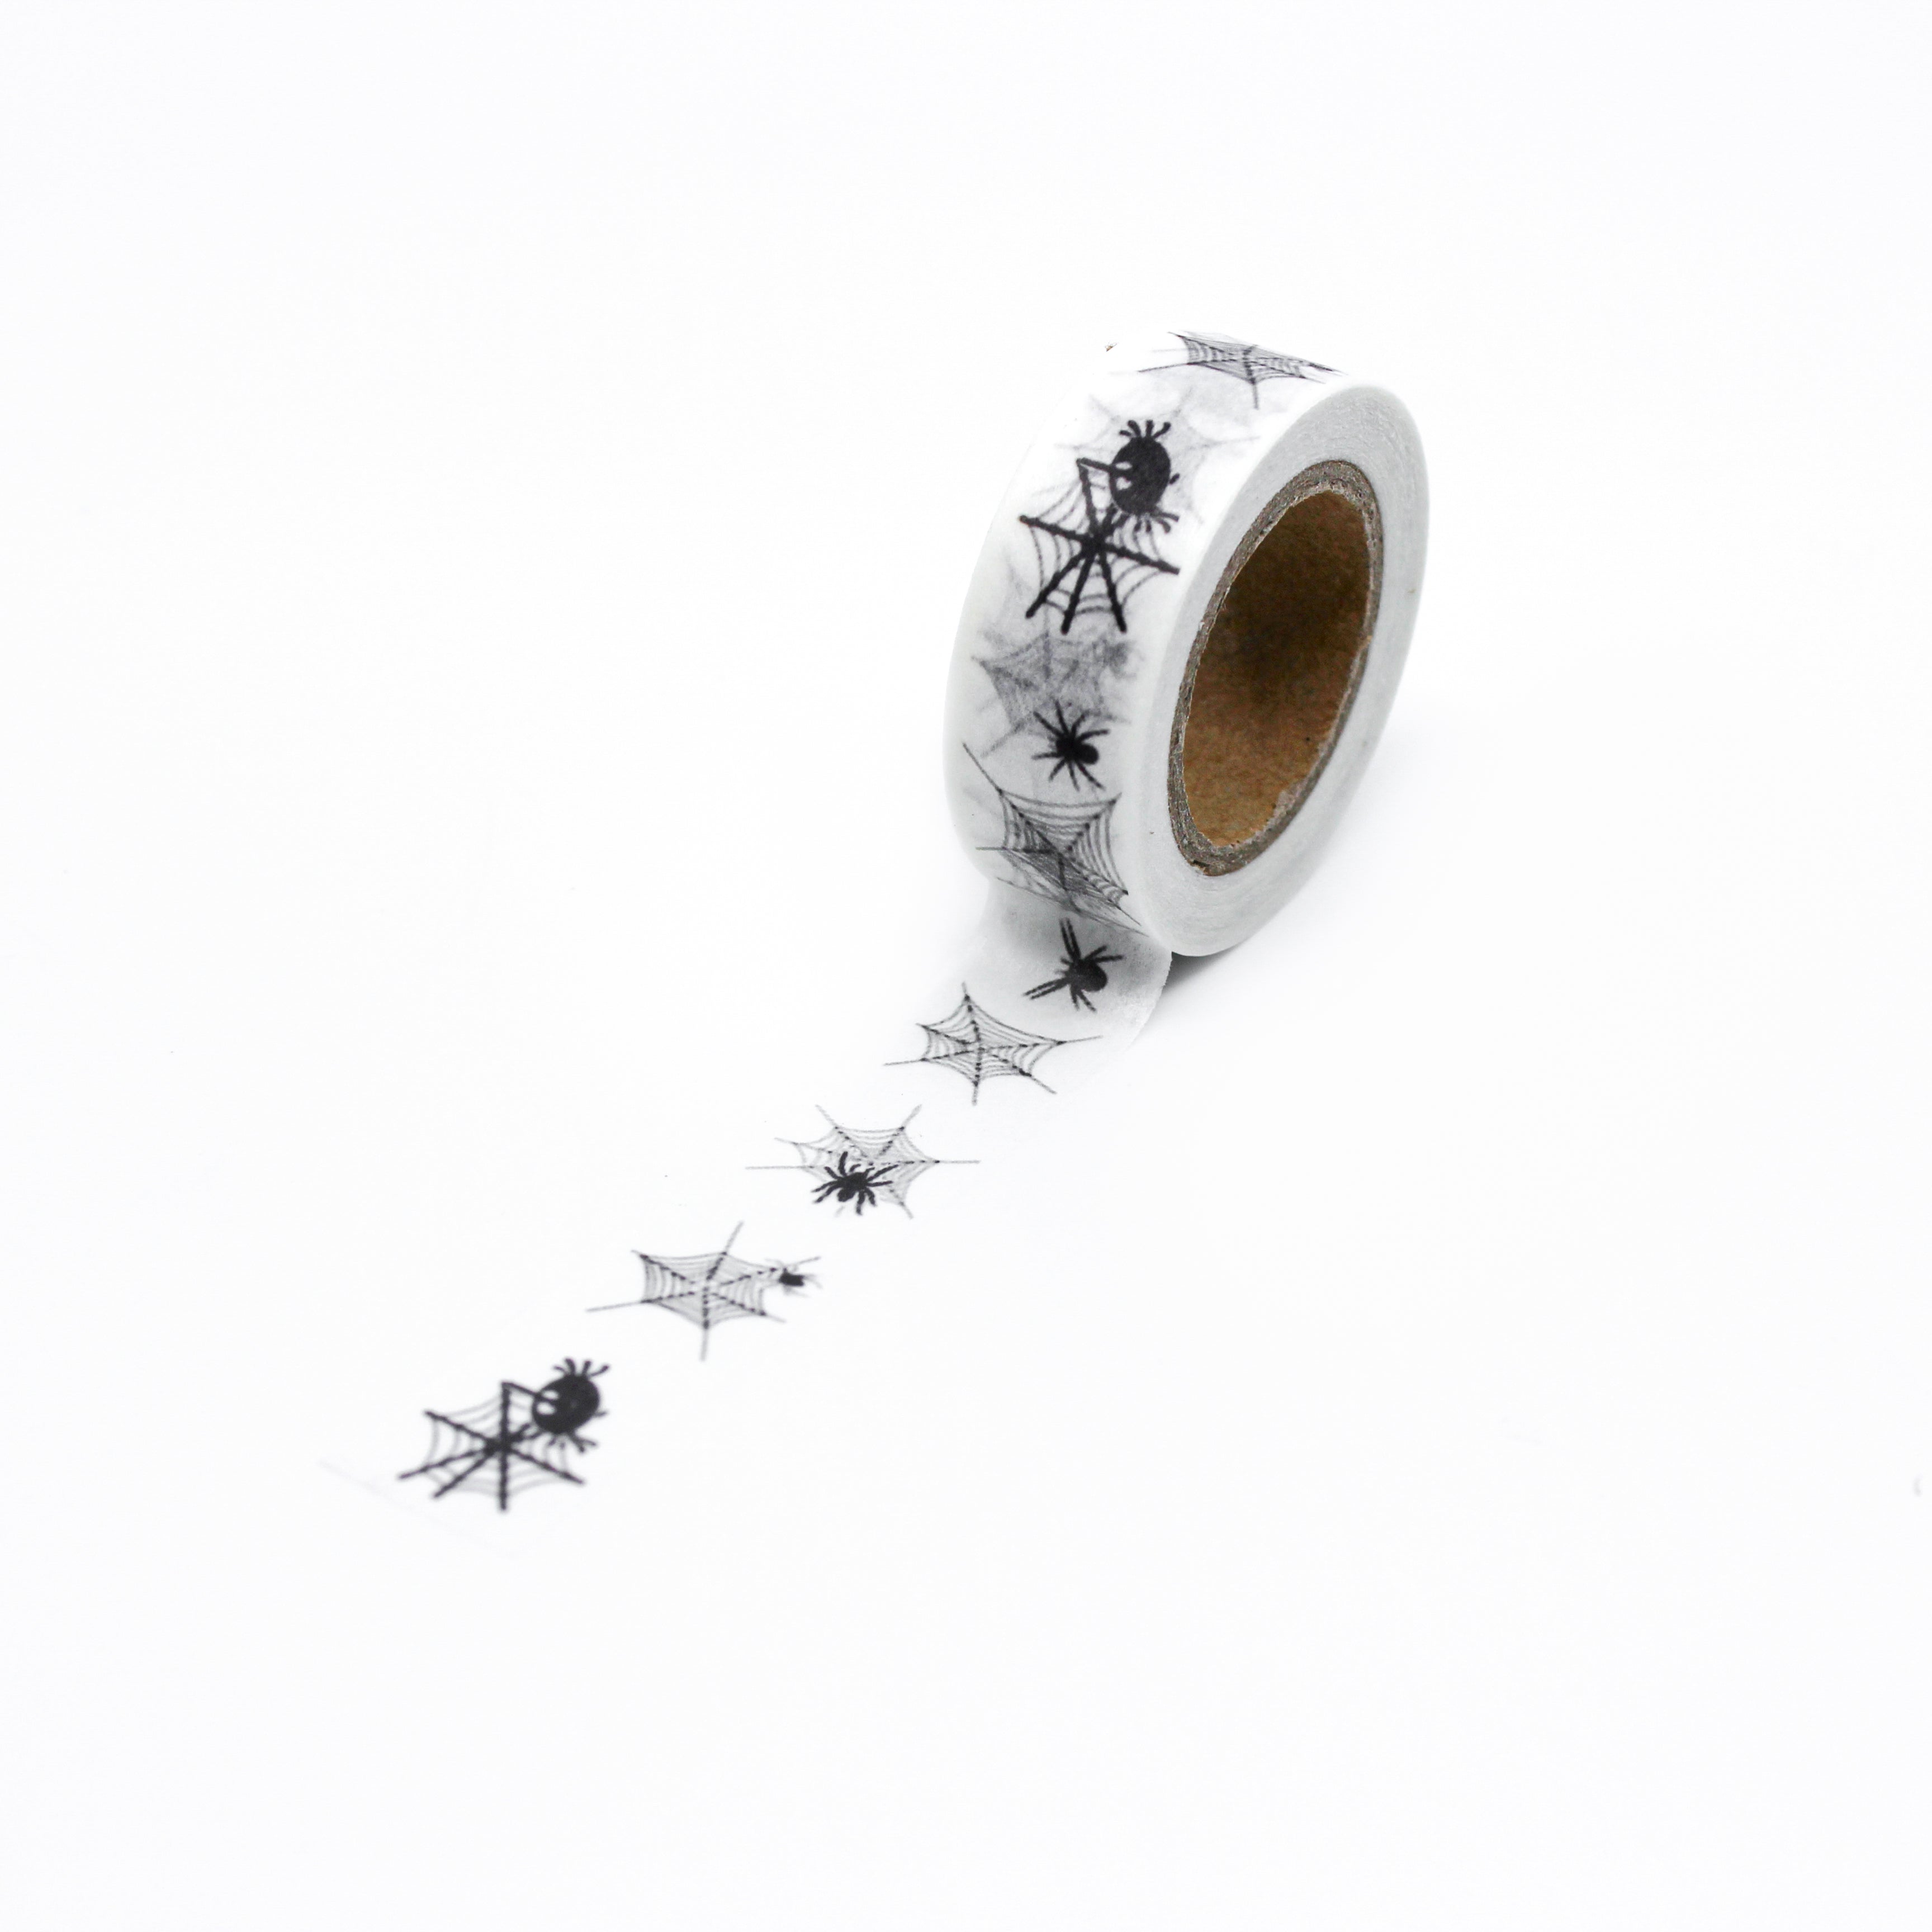 This is a full pattern of black spider with spiderwebs washi tape from BBB Supplies Craft Shop